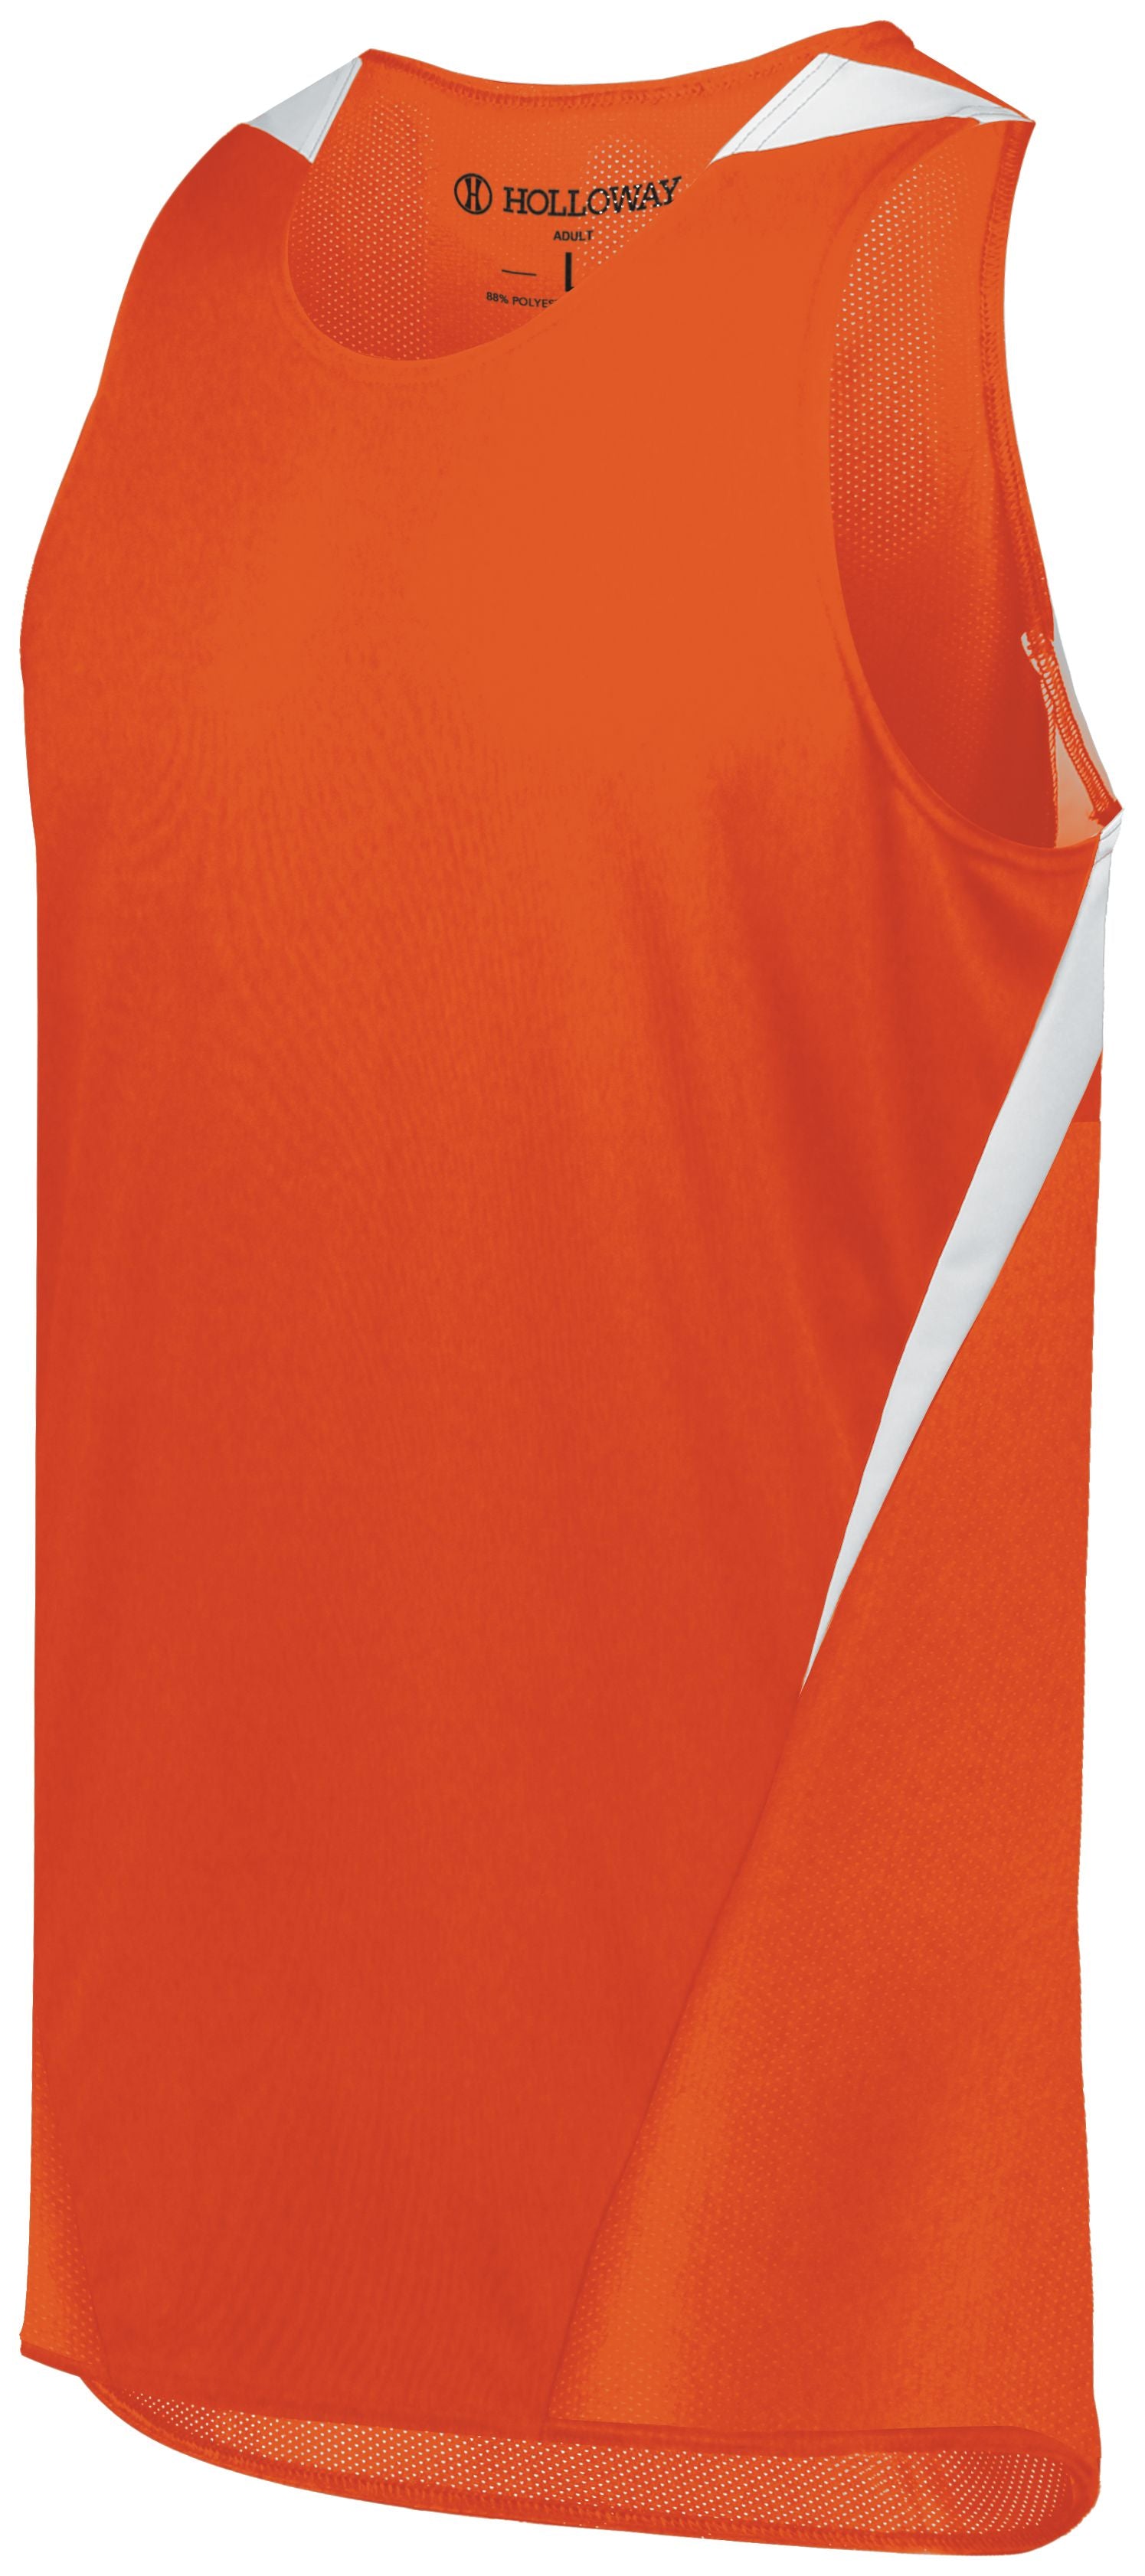 Holloway Pr Max Track Jersey in Orange/White  -Part of the Adult, Adult-Jersey, Track-Field, Holloway, Shirts product lines at KanaleyCreations.com